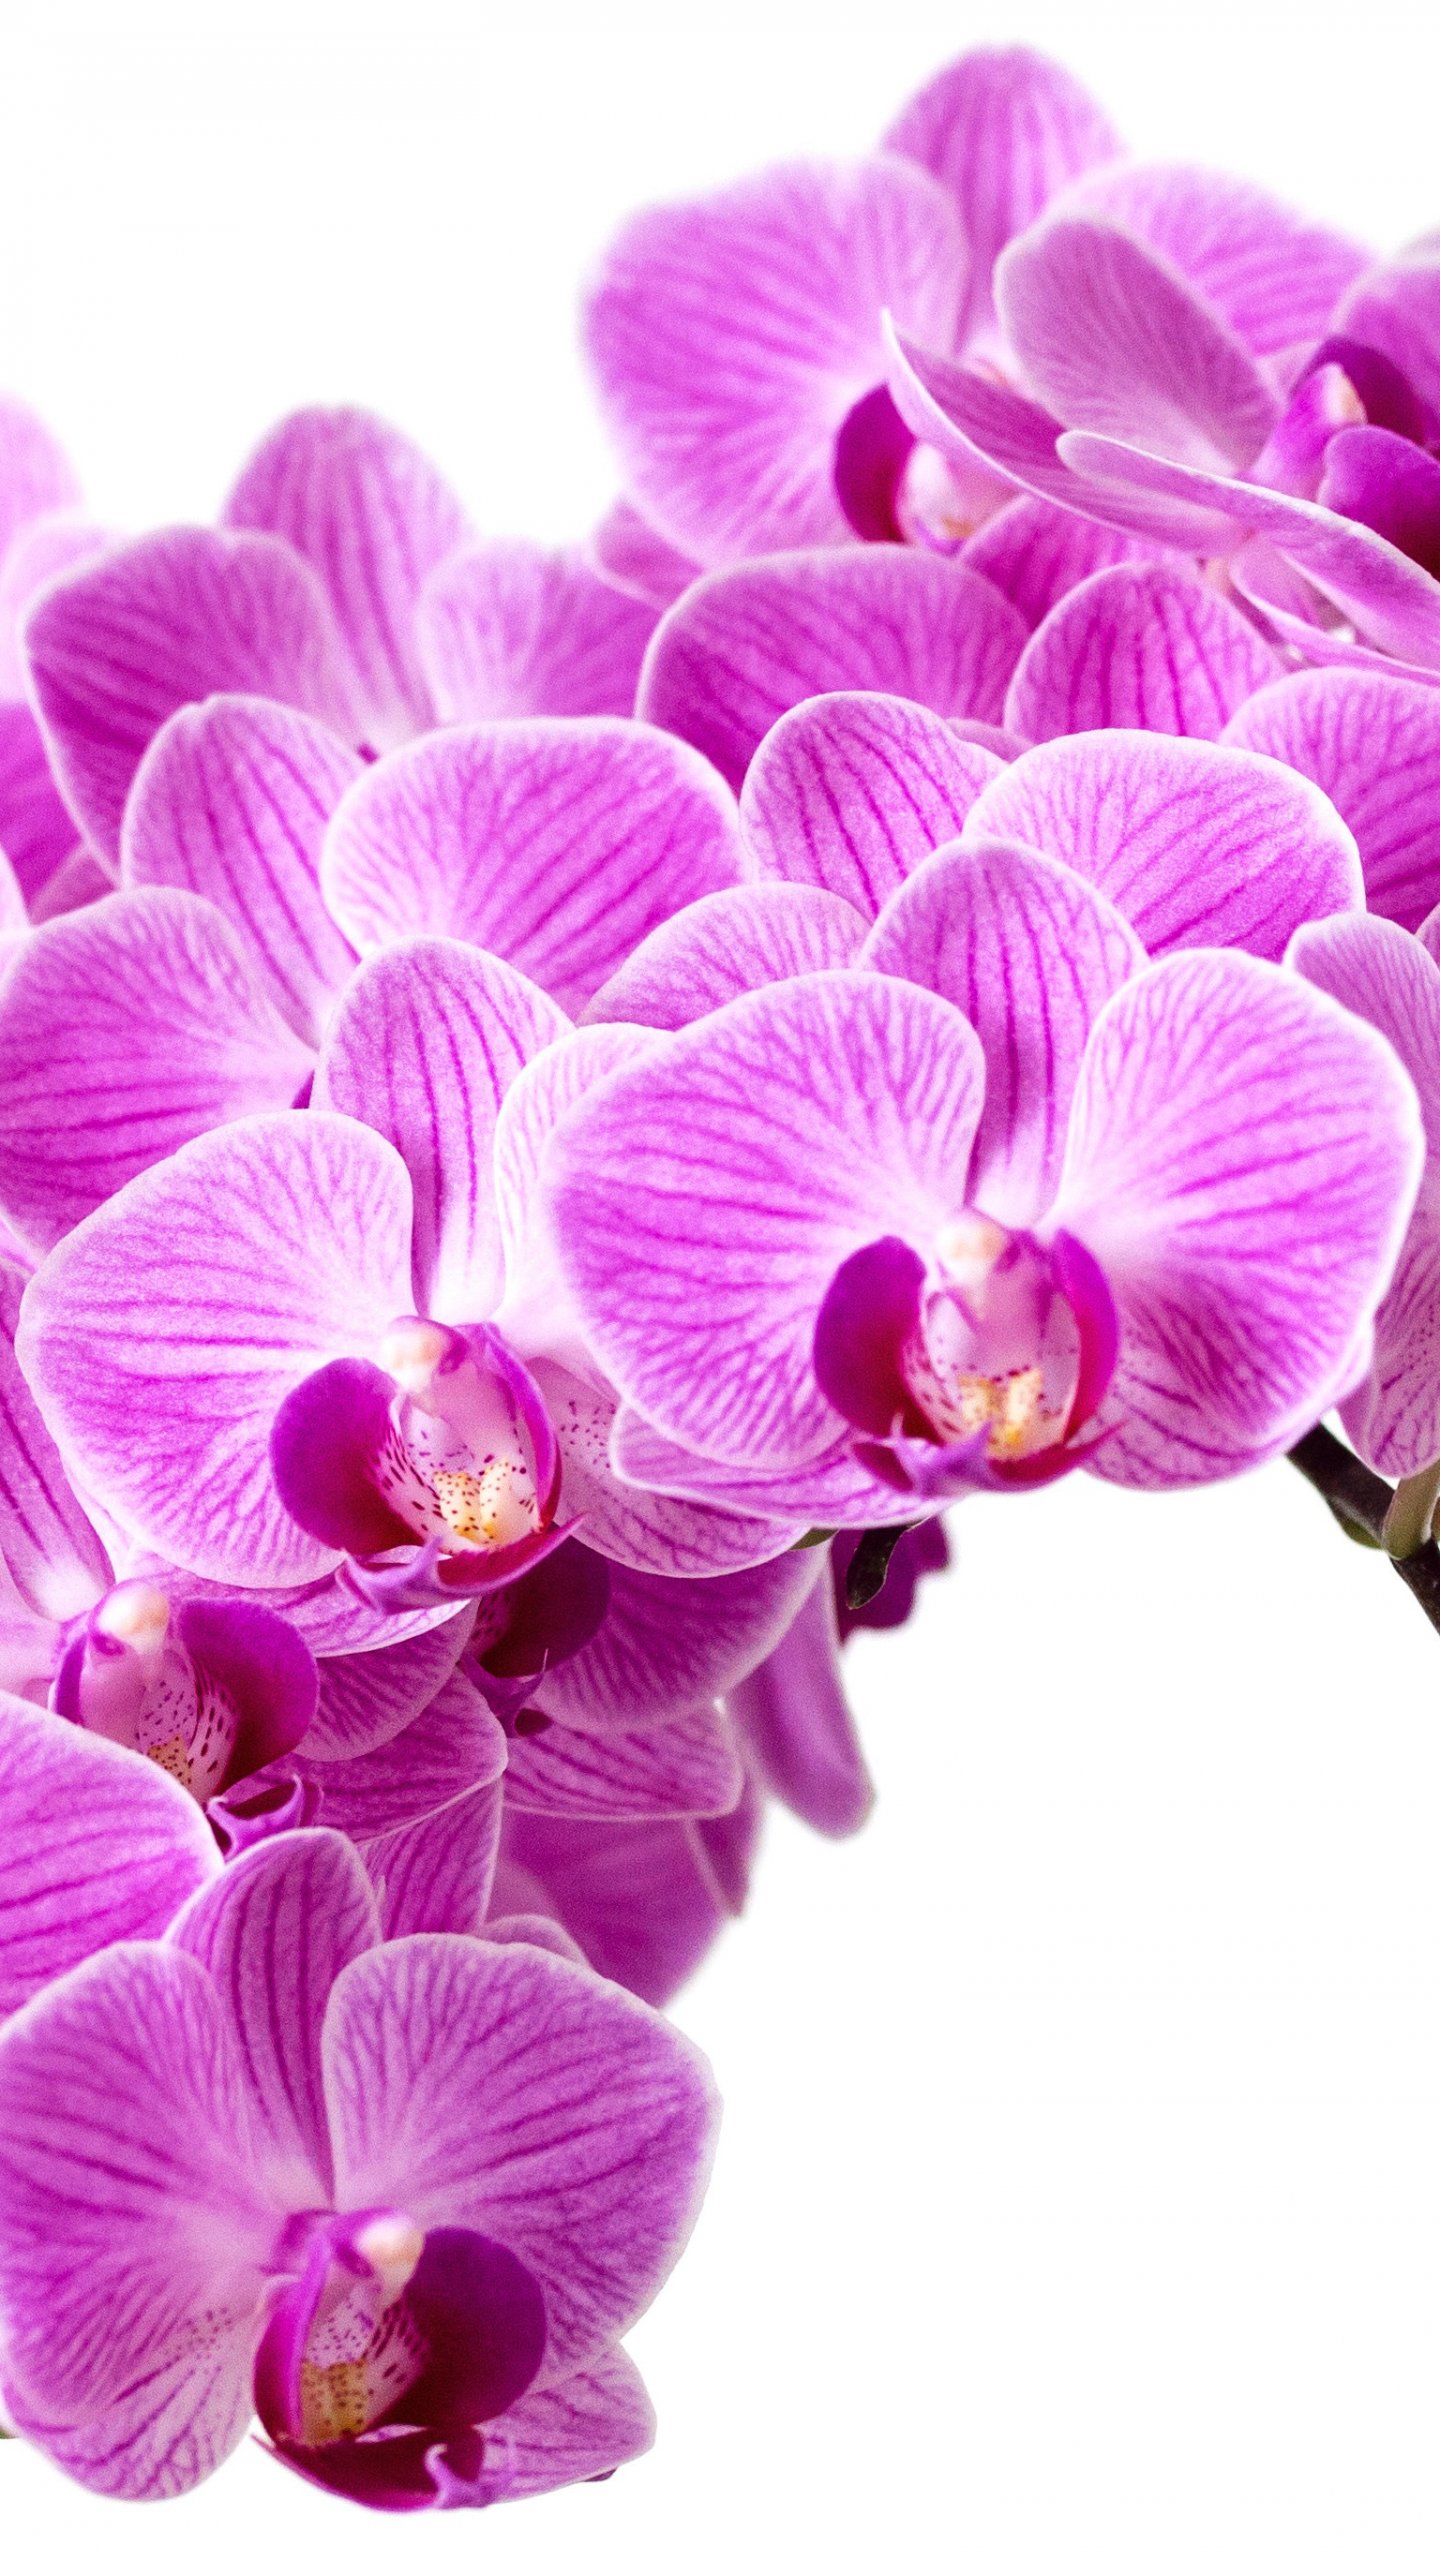 100 Orchid wallpapers HD  Download Free backgrounds